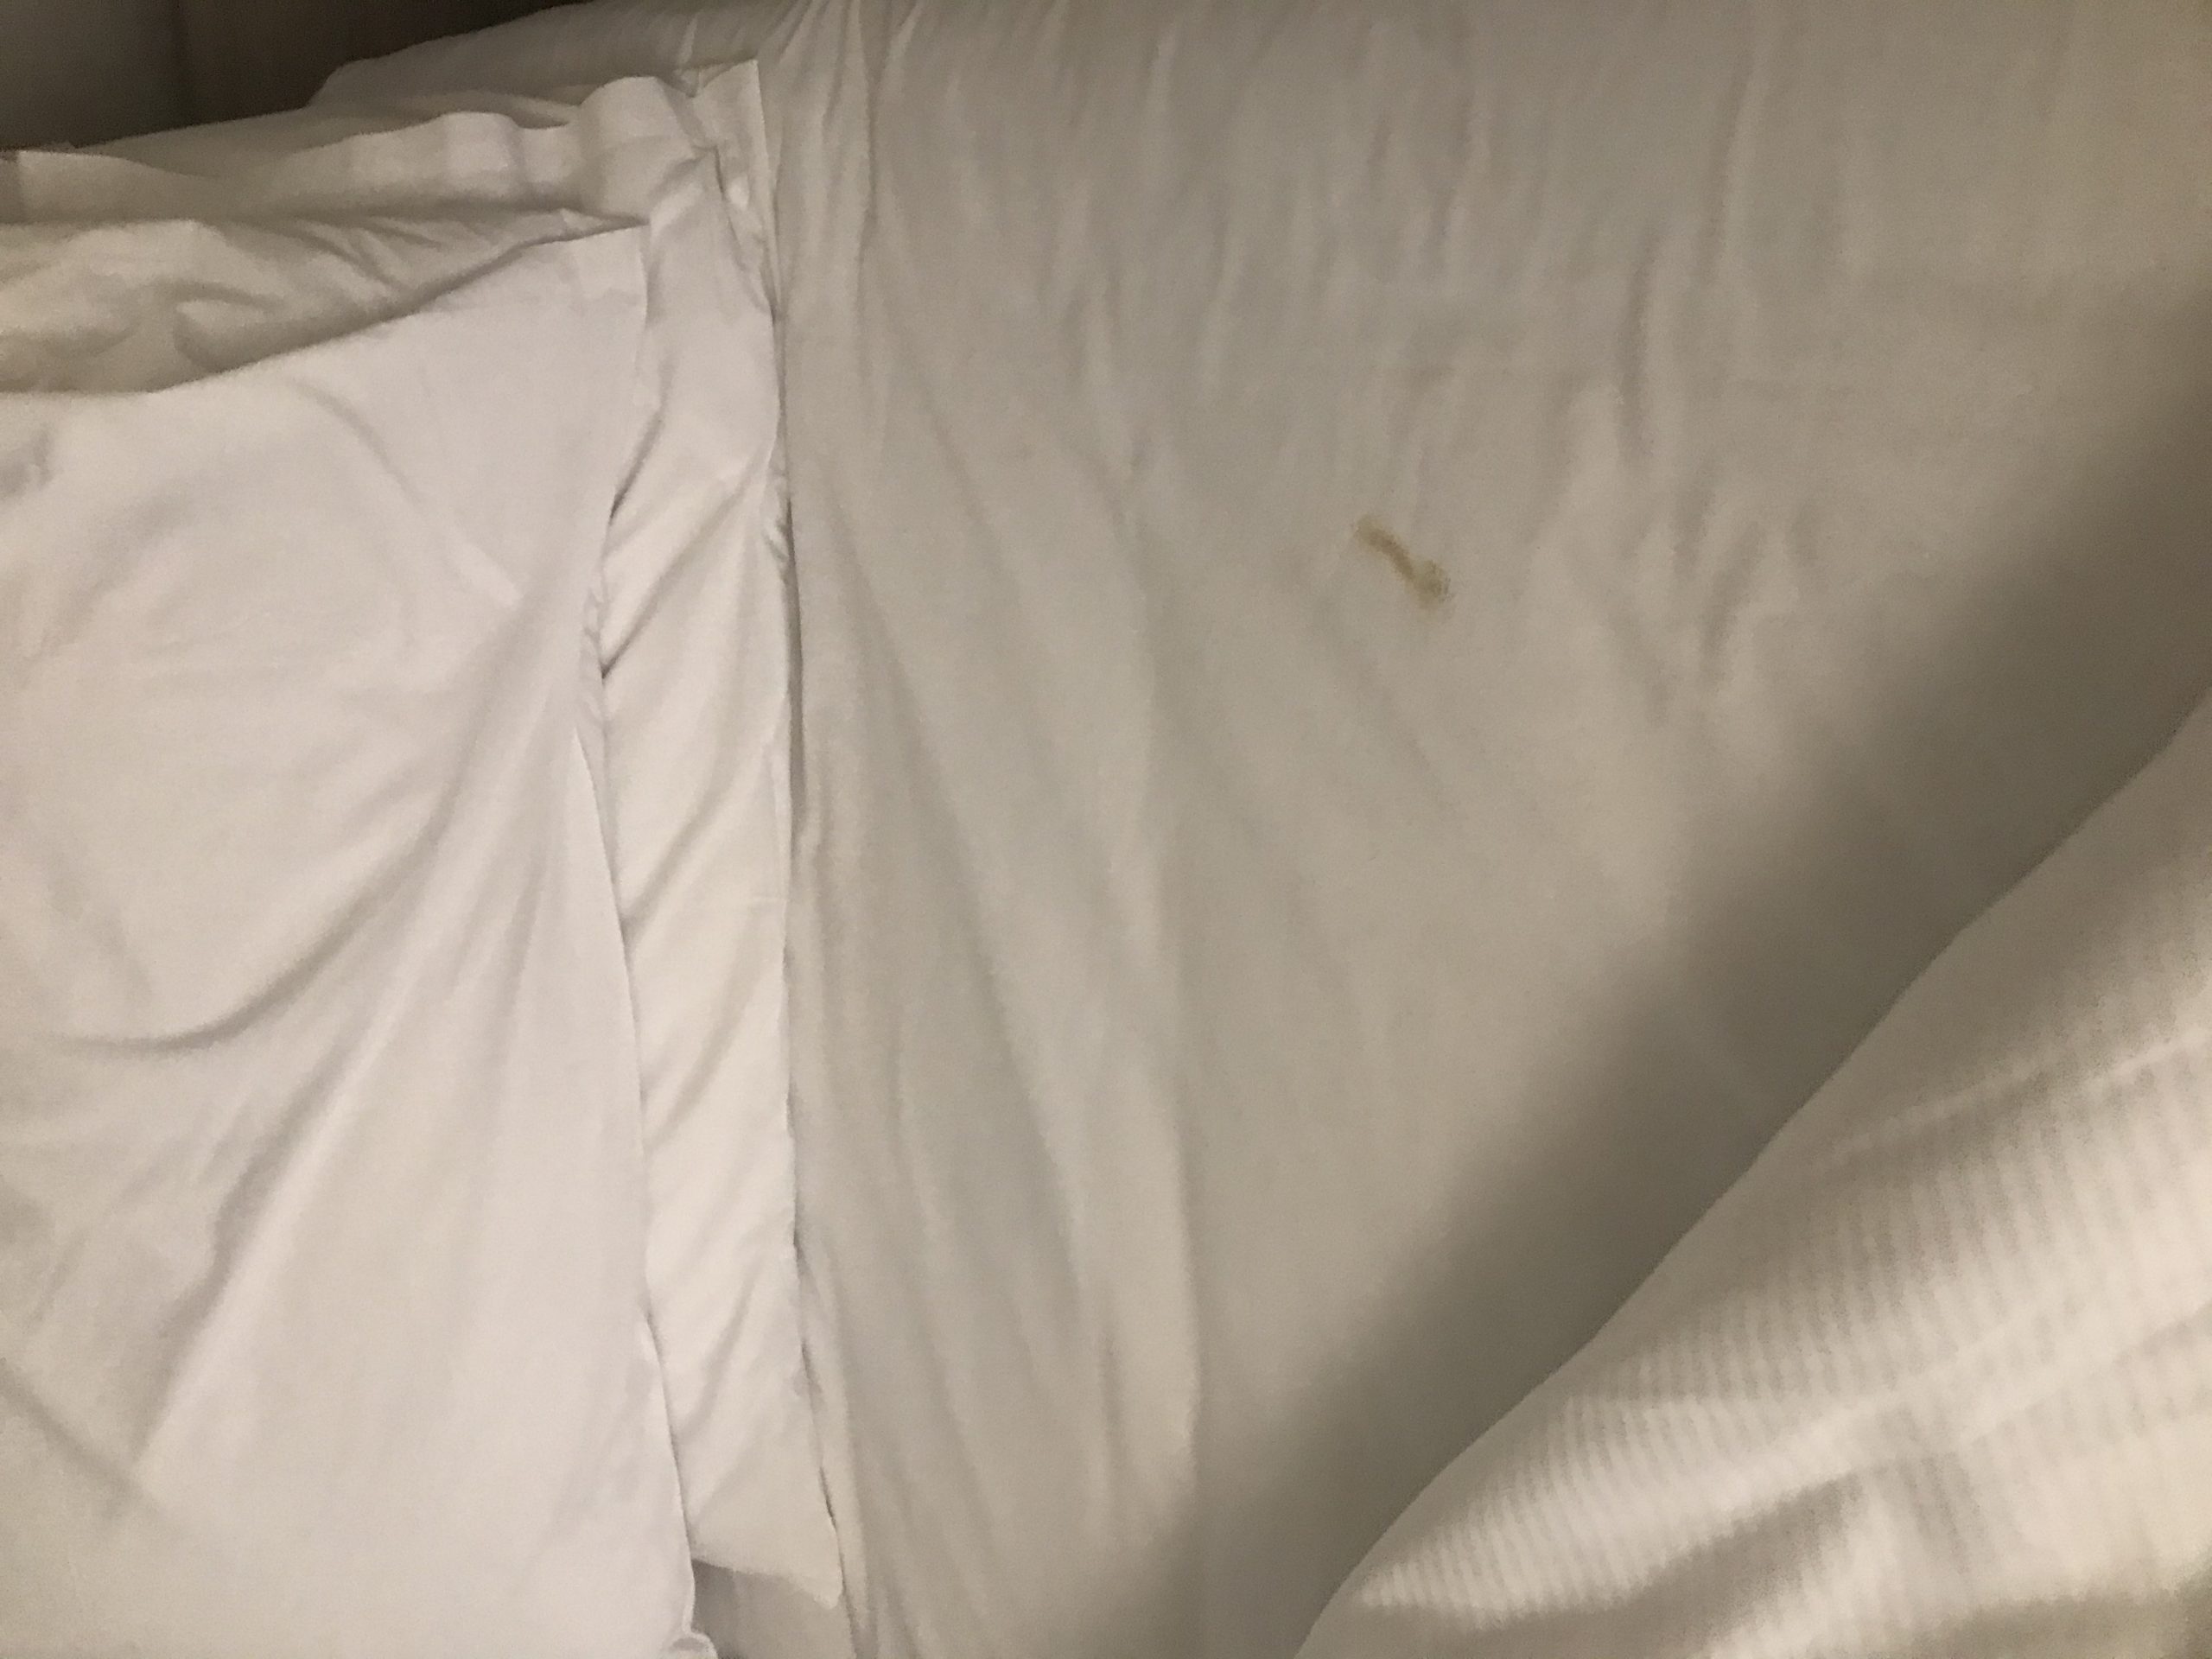 Hampton Inn by Hilton complaint Brown mark on white sheet when I pulled back the bedding